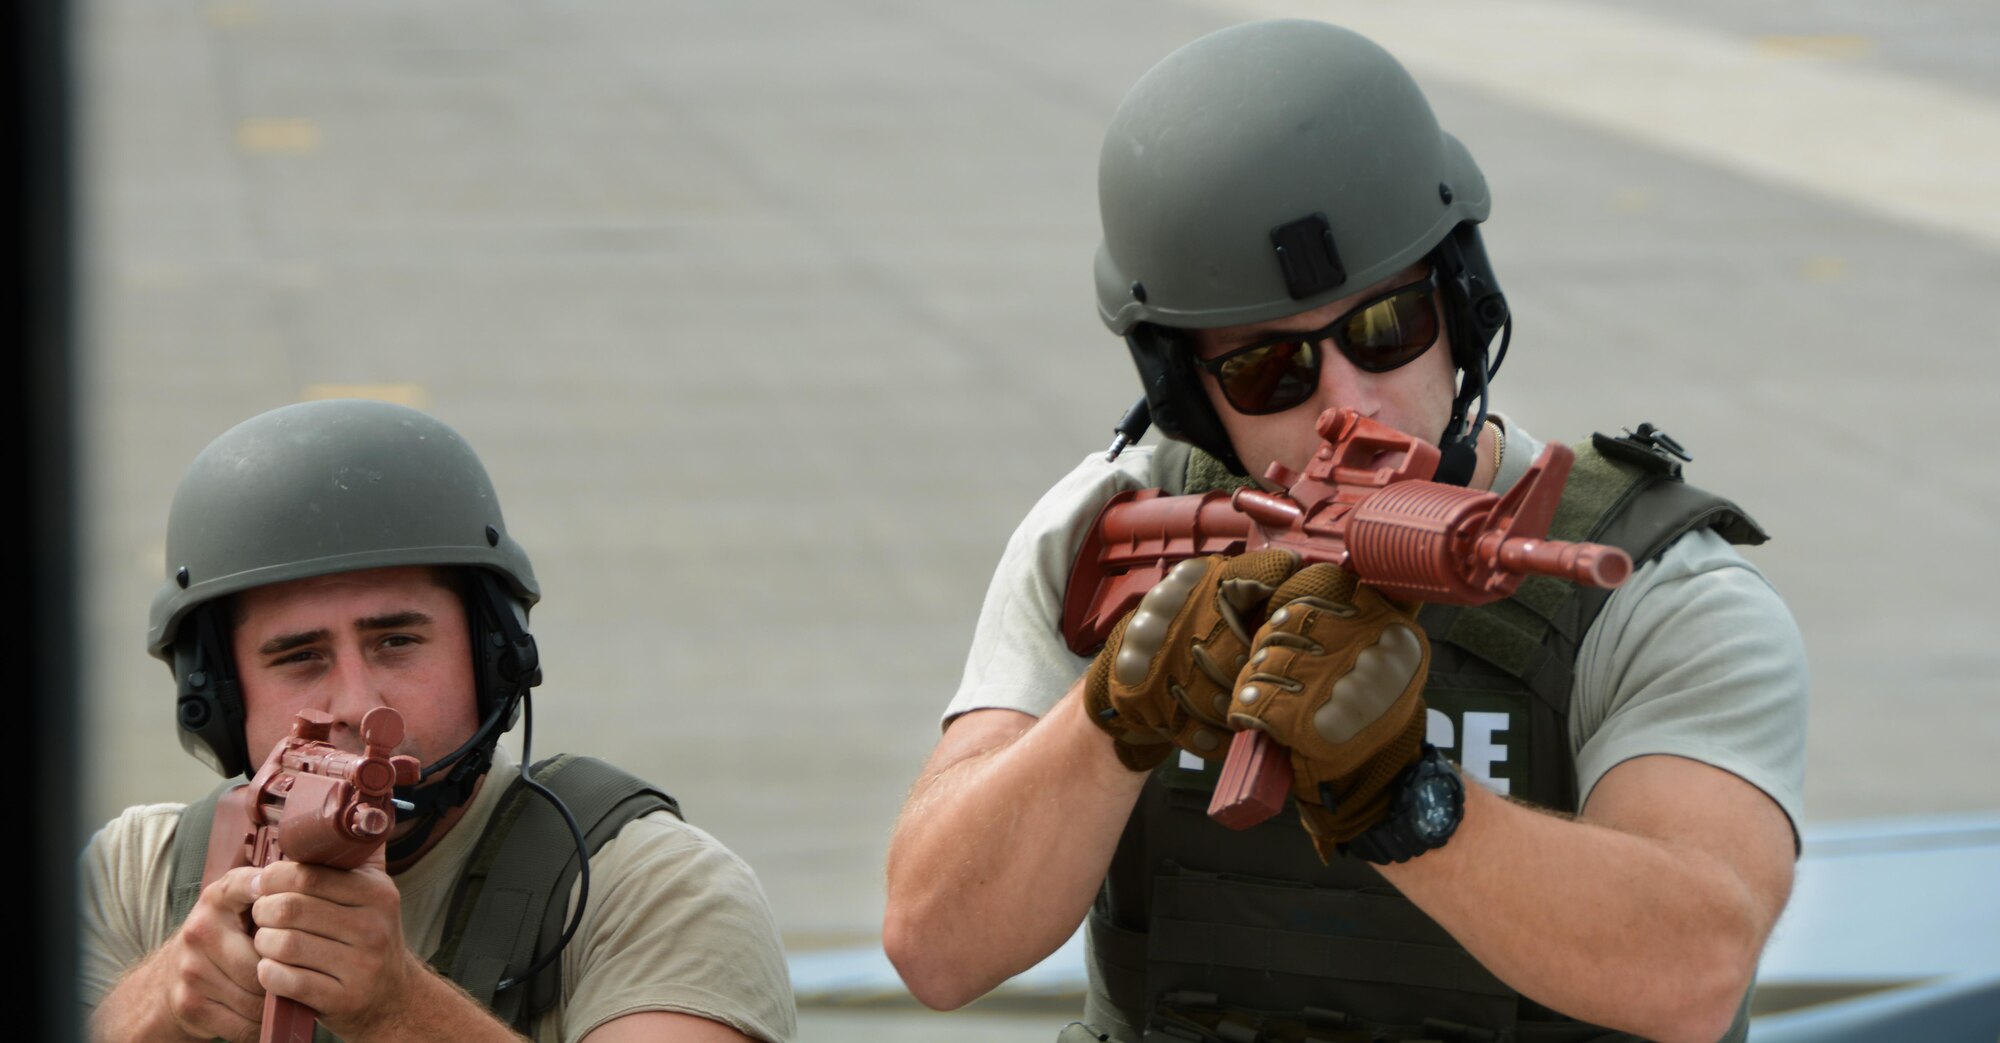 Policemen from the local police departments of Ludlow and Springfield Mass. participated in aircraft clearing exercises.